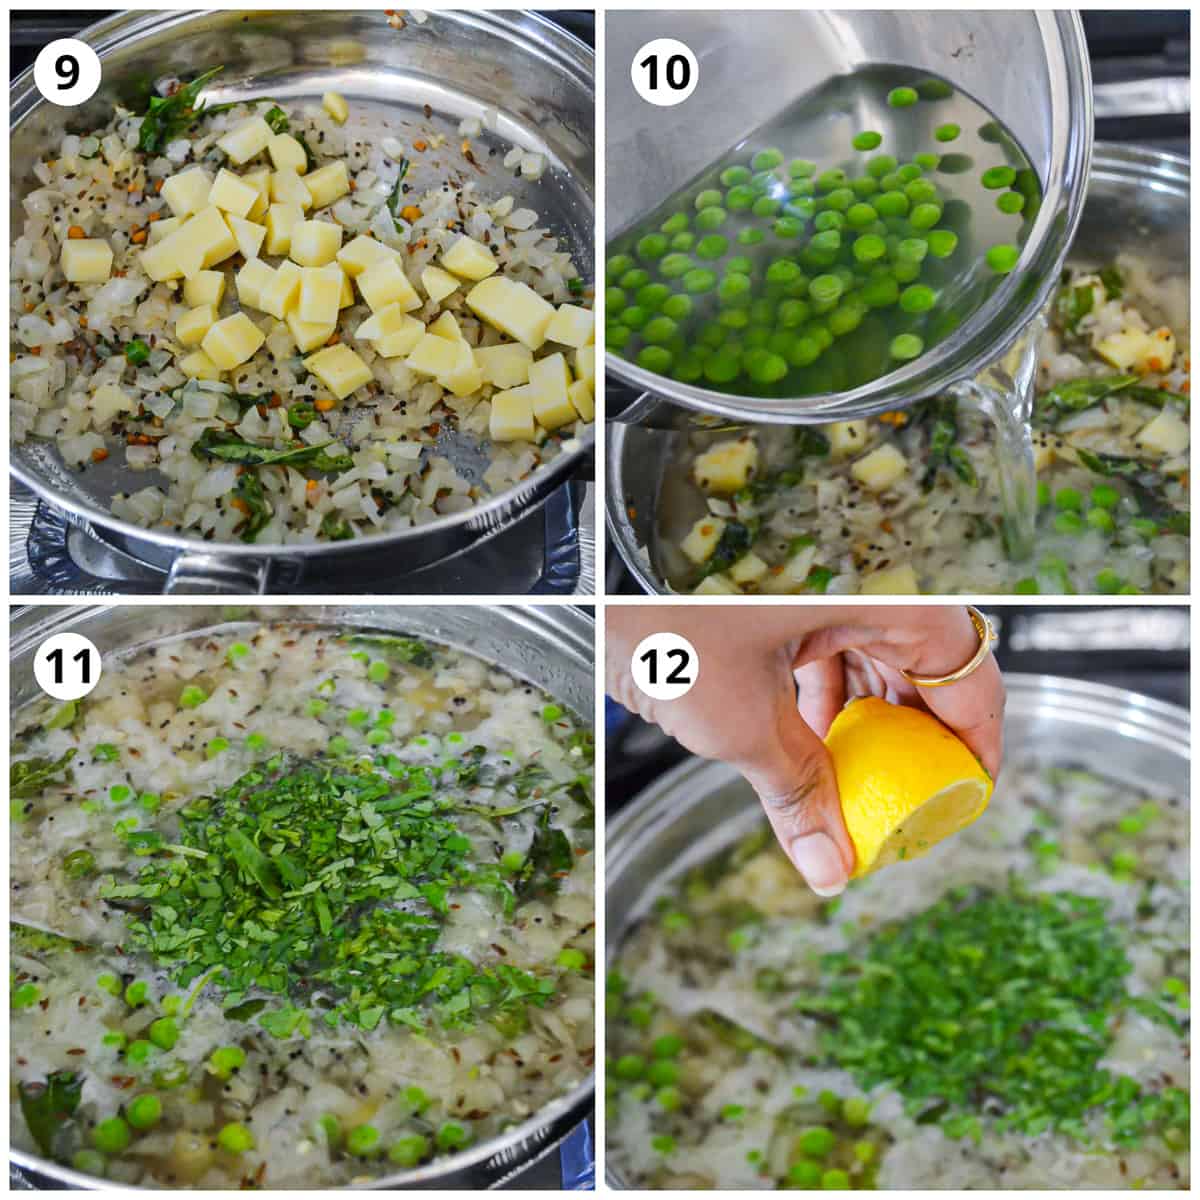 Cooking the potatoes and adding the peas